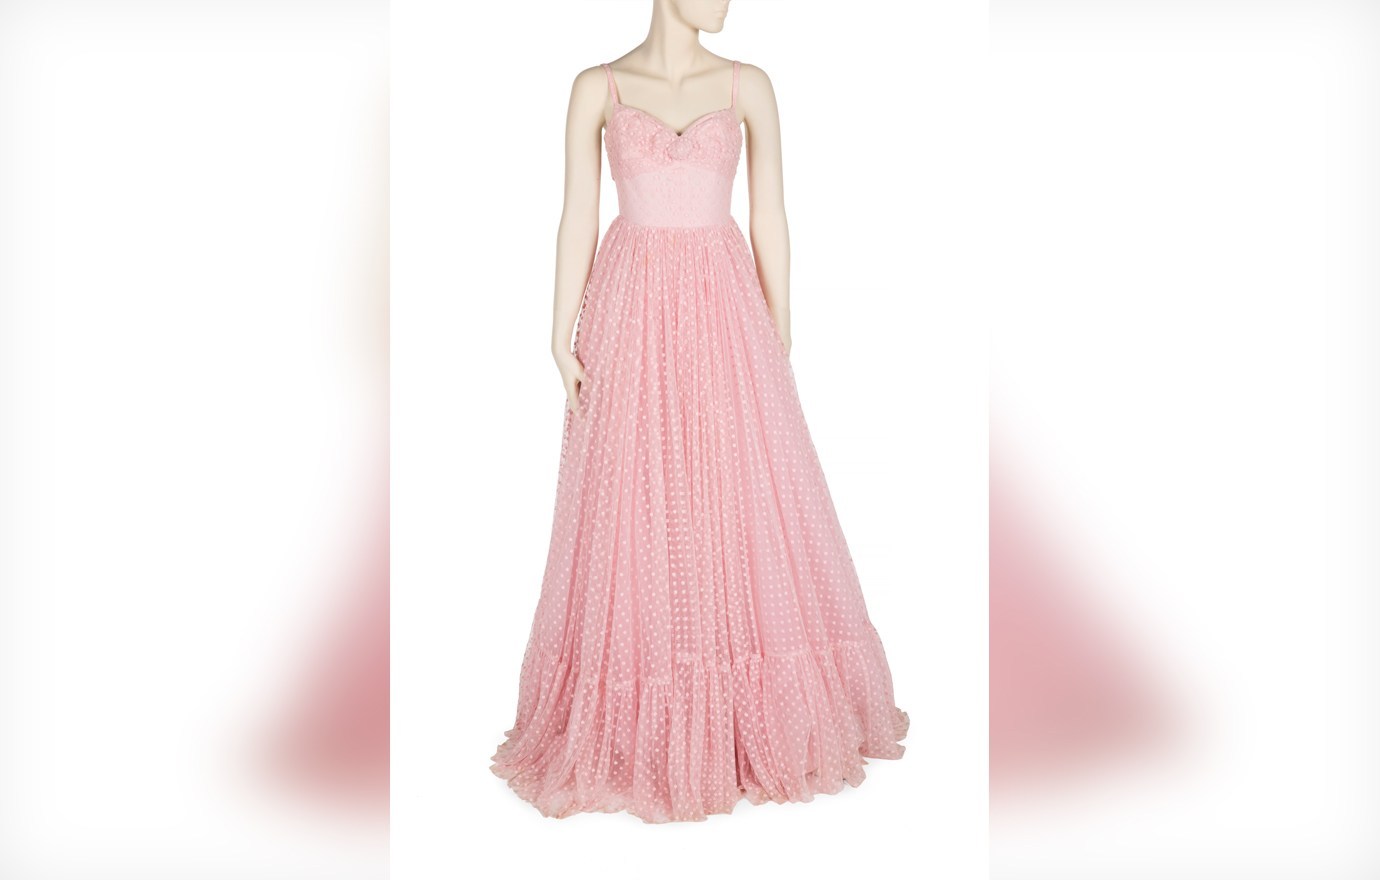 Strapless pink lace gown